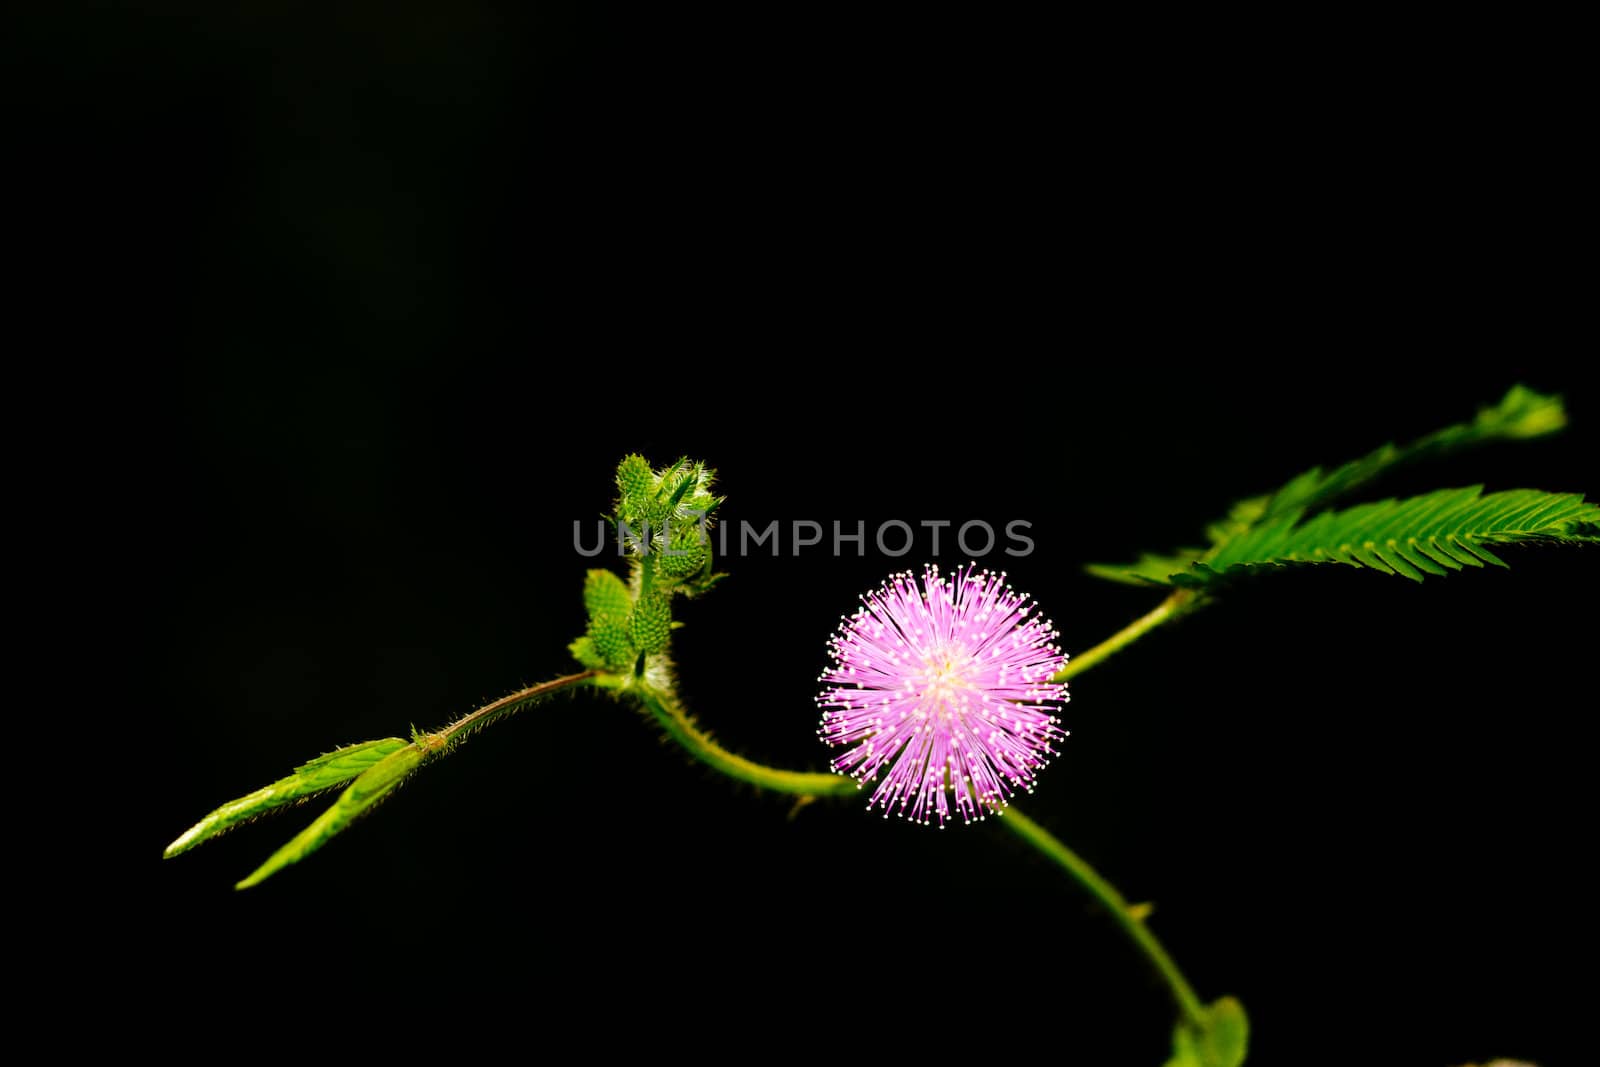 Mimosa pudica Linn, The ground cover plant is sensitive to touch and vibration.